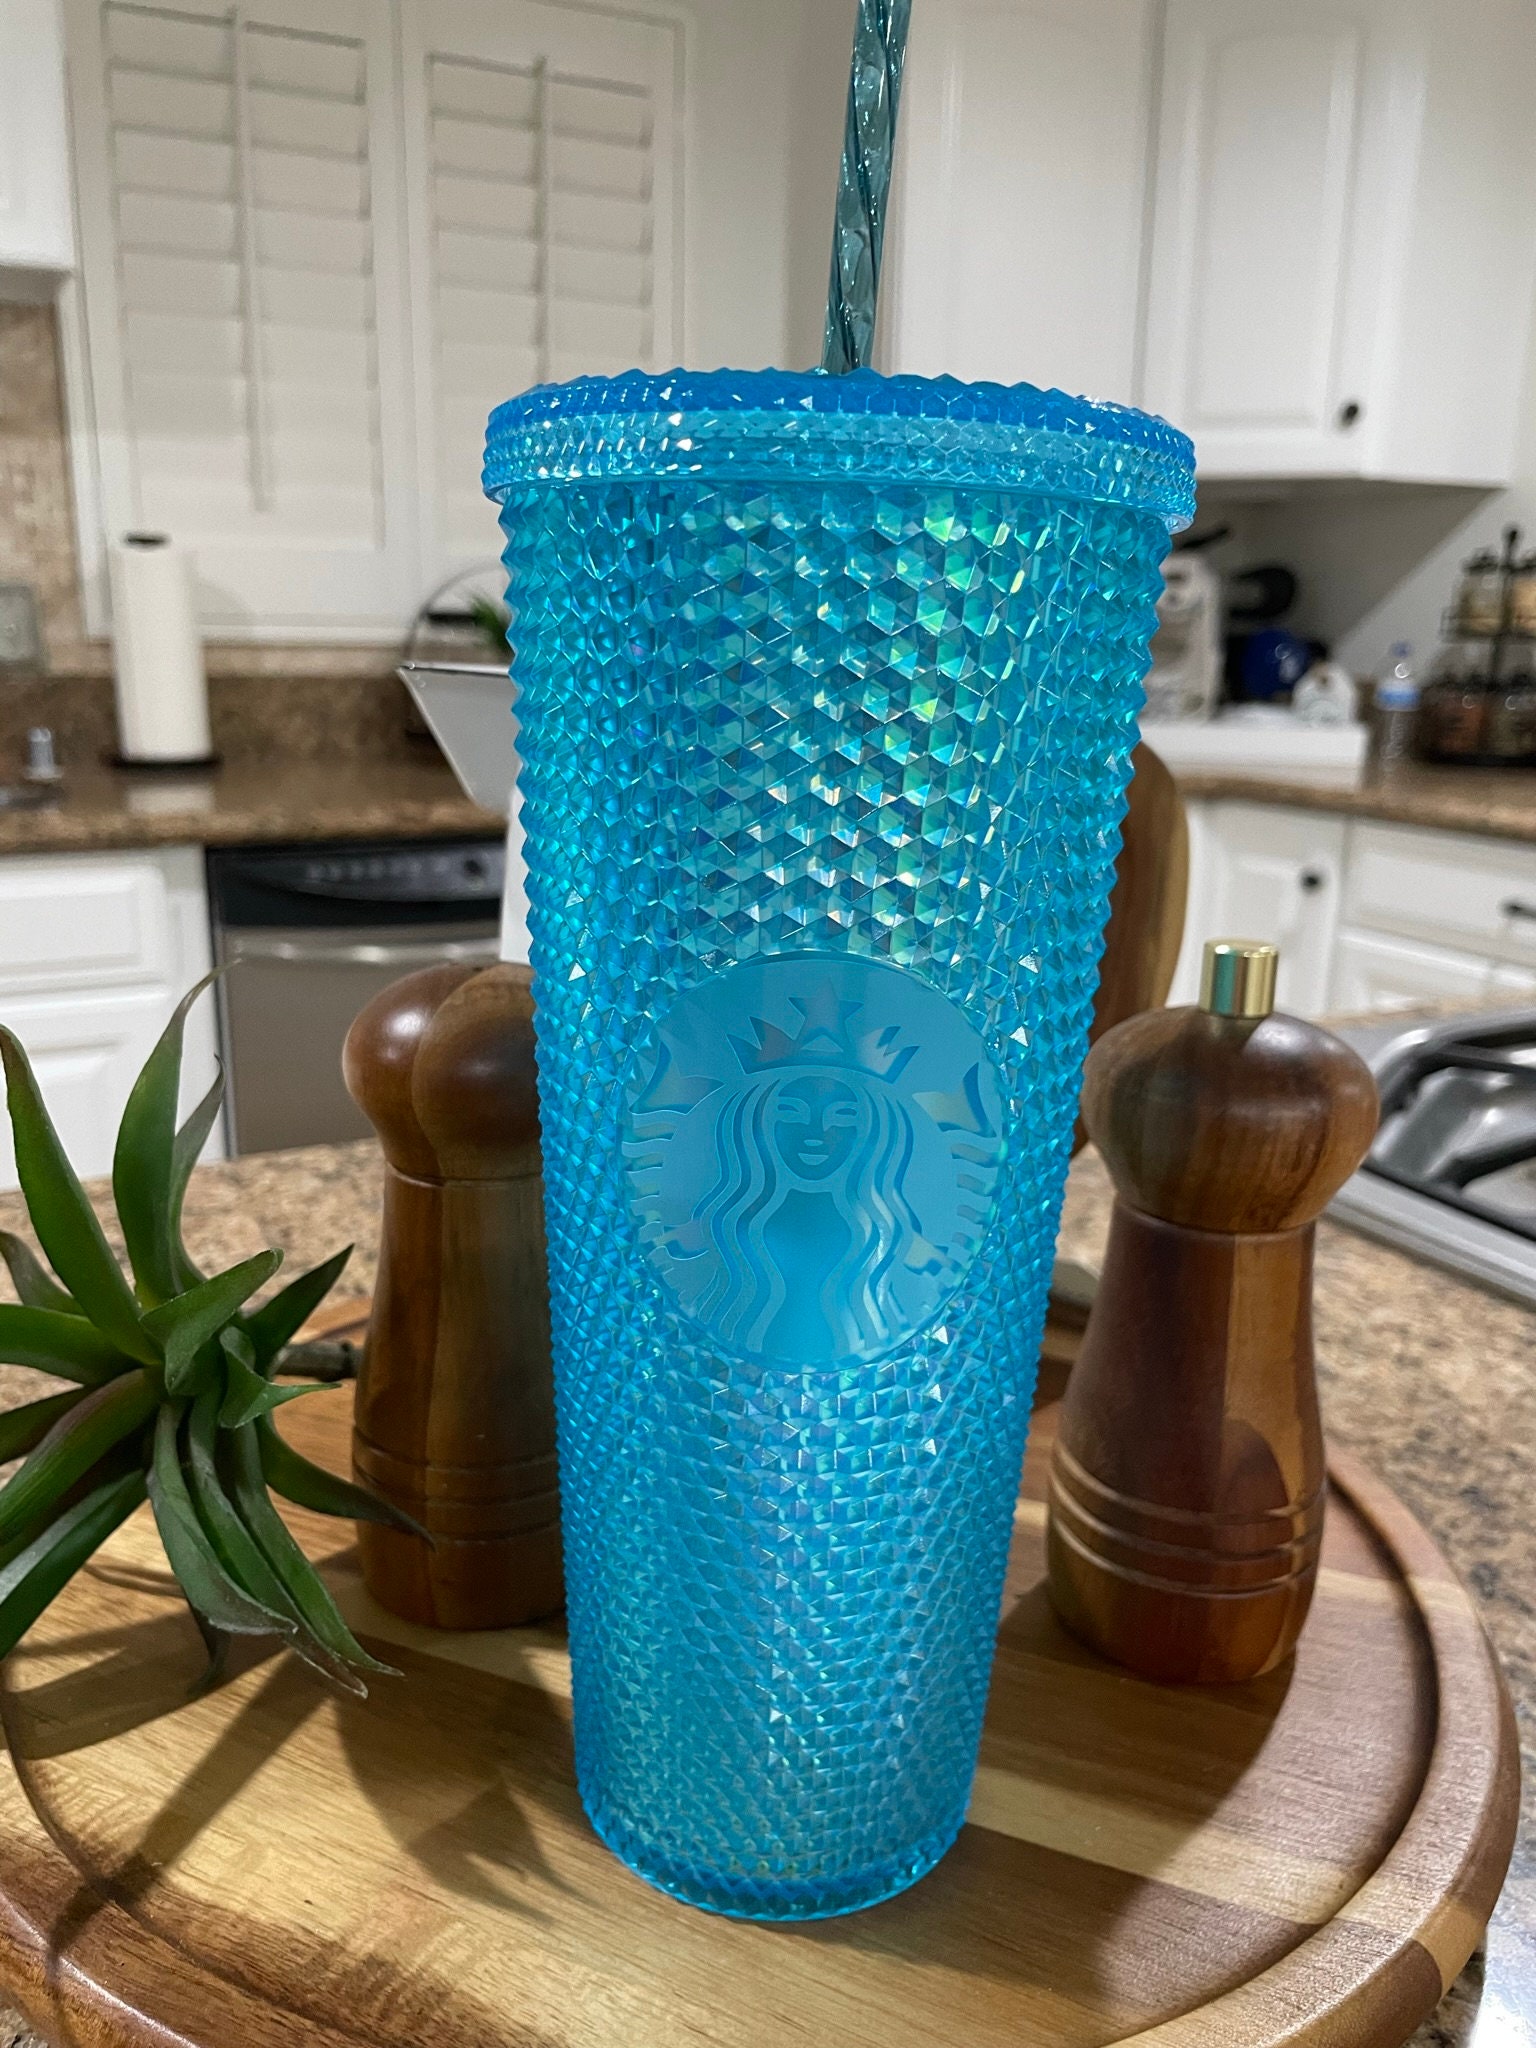 Starbucks STANLEY Tumbler Stainless Steel Pastel &Turquoise 22 oz. Cold Cup